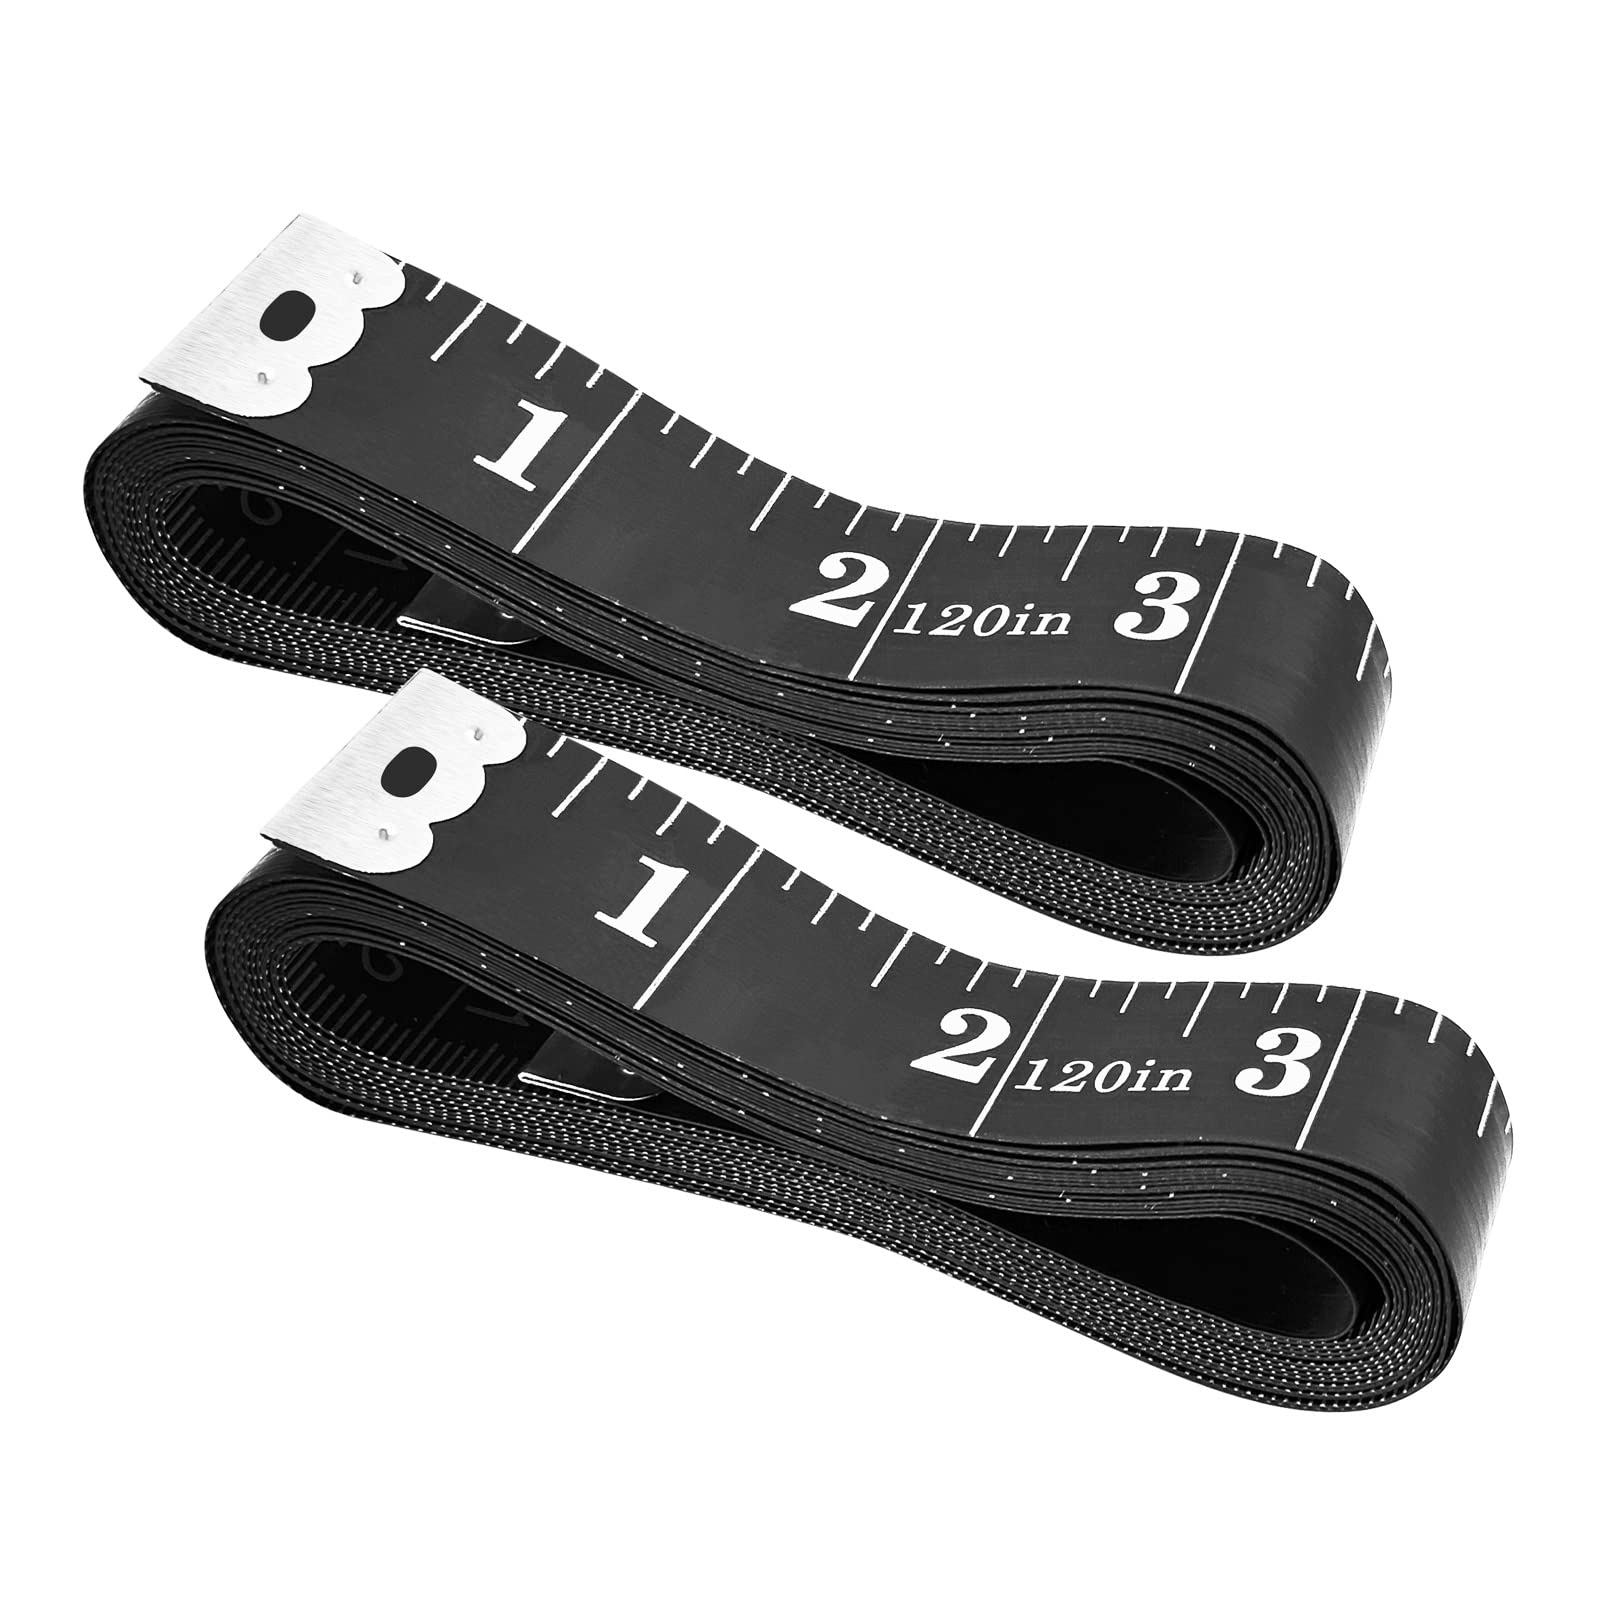 3 Pack Soft Measuring Tape for Body,Double Scale Fabric Craft Tape Measure  Sewing Tailor Cloth Flexible Ruler for Weight Loss 60 inch/150cm,White